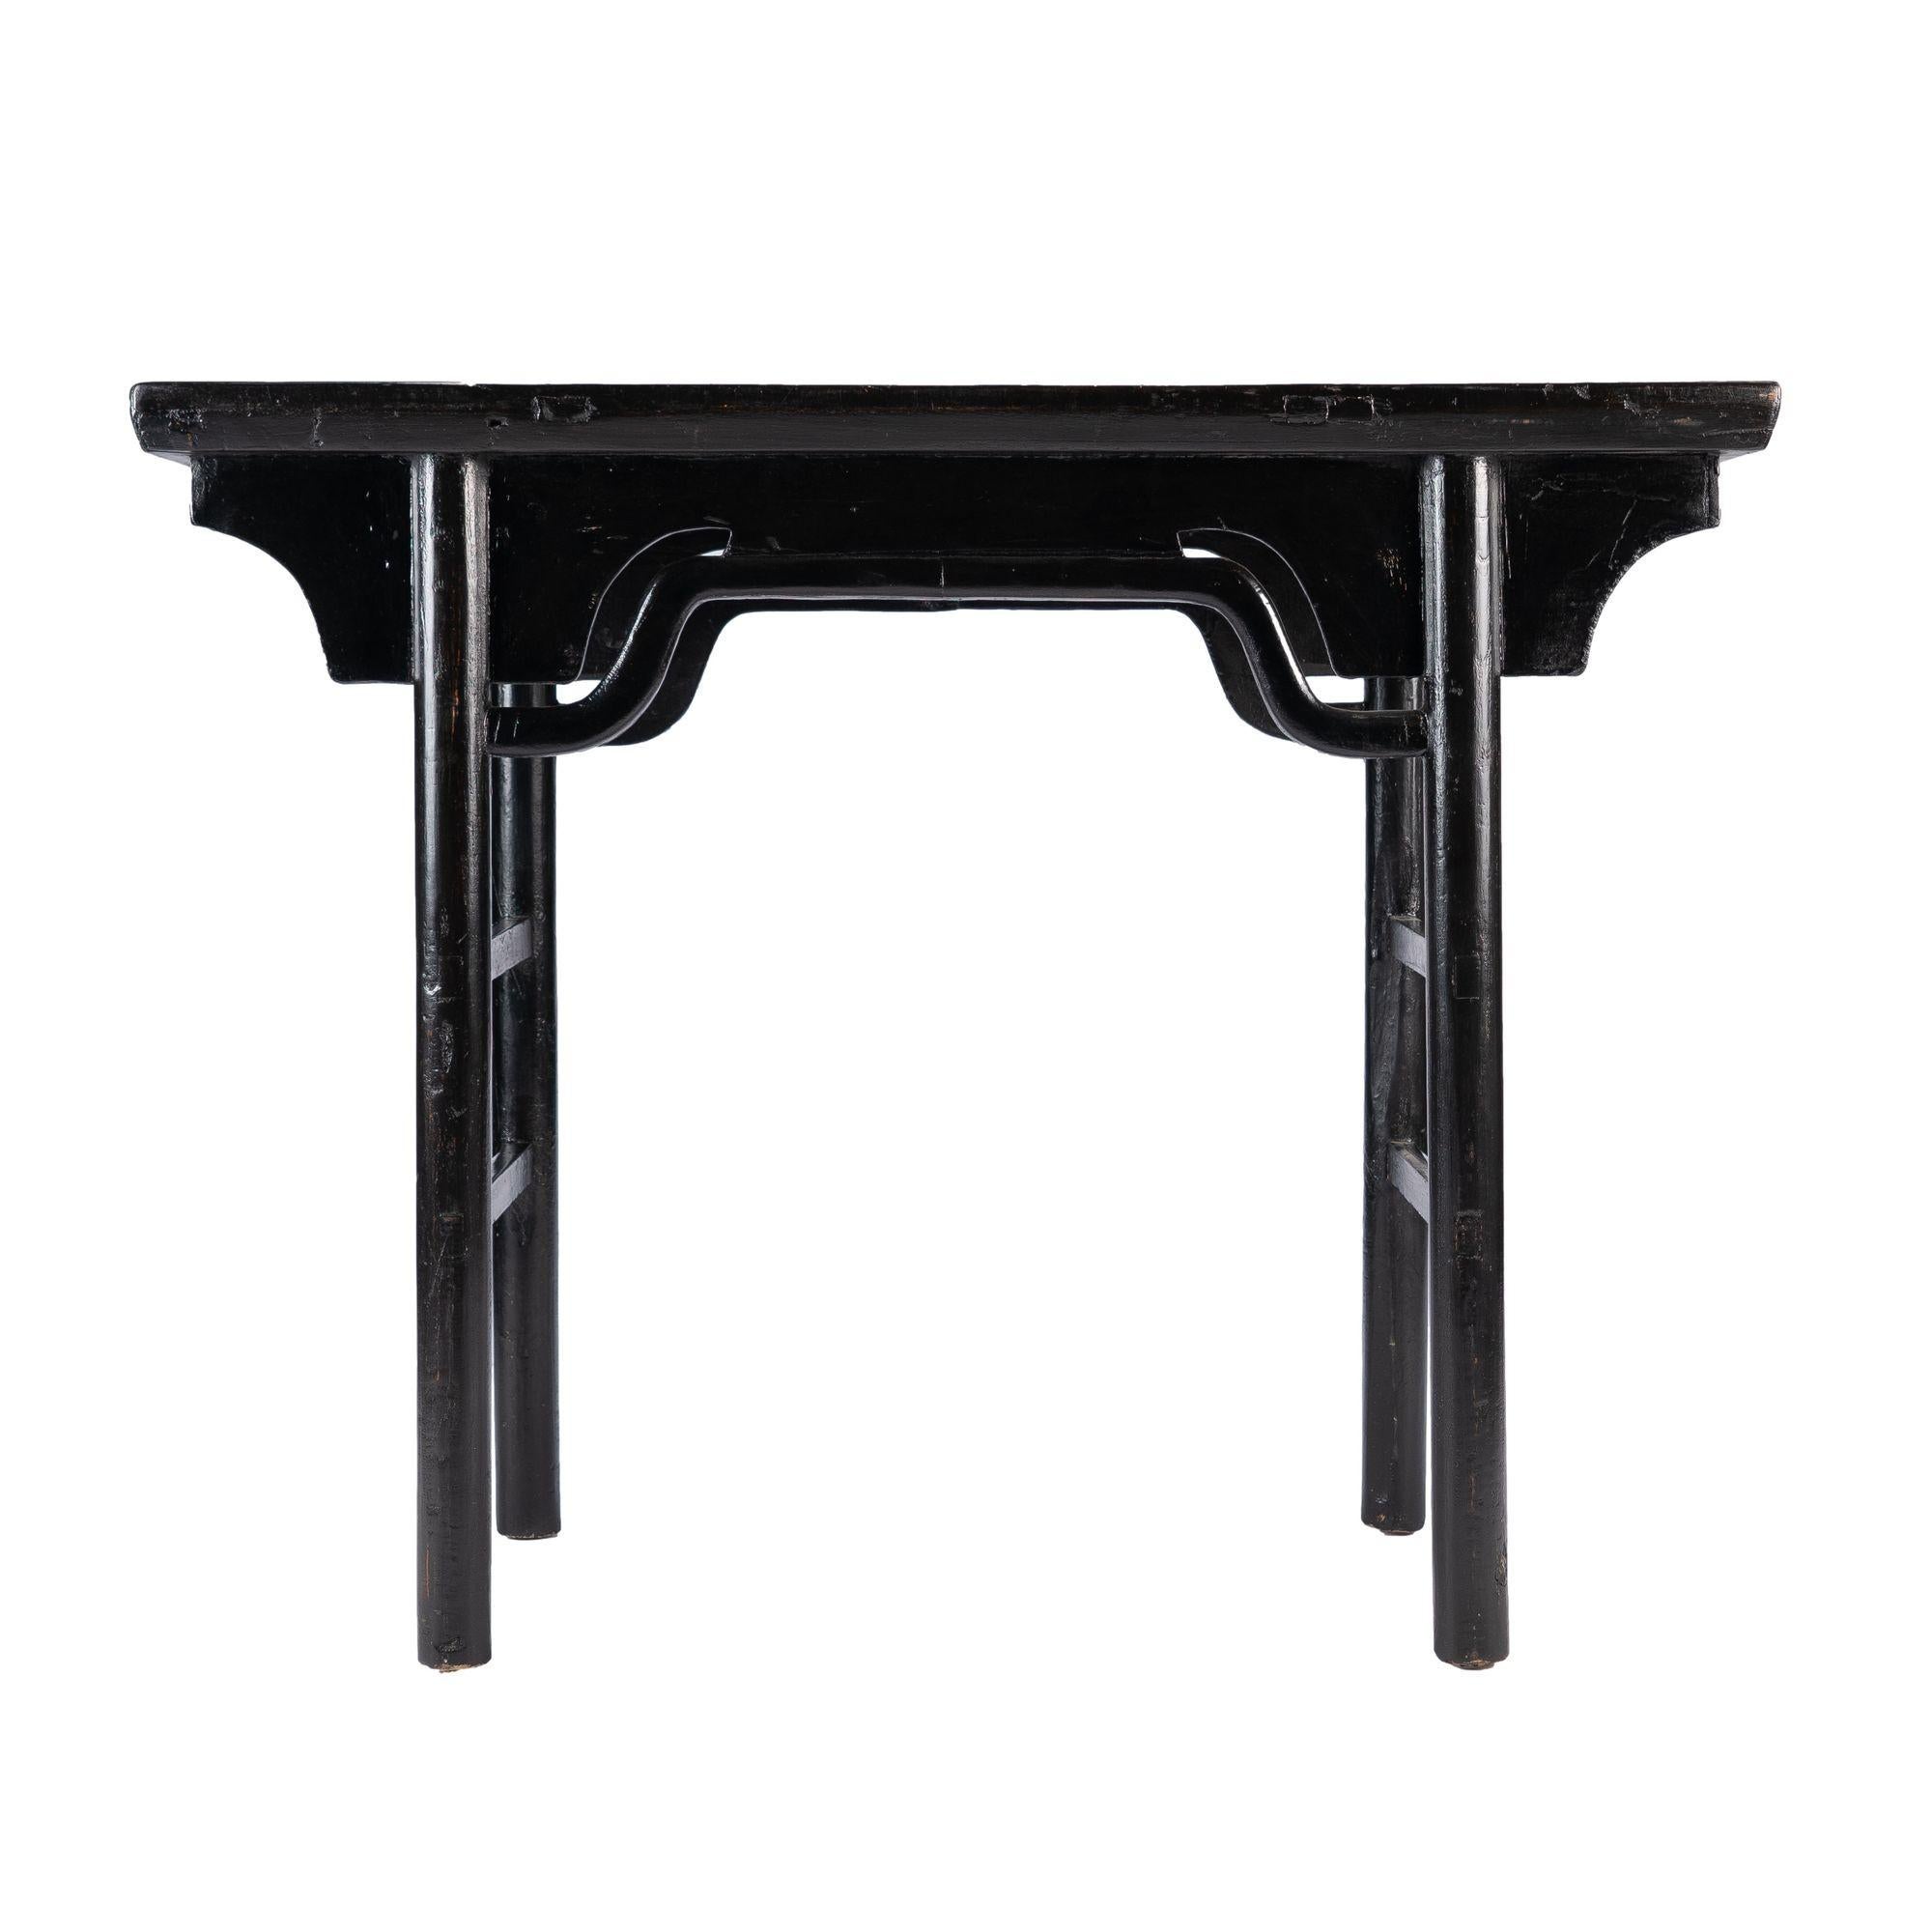 Black lacquered elm wood wine table with articulated hump back “bridge” apron rail.
Chinese, Kuang Hsu Period, circa 1875.